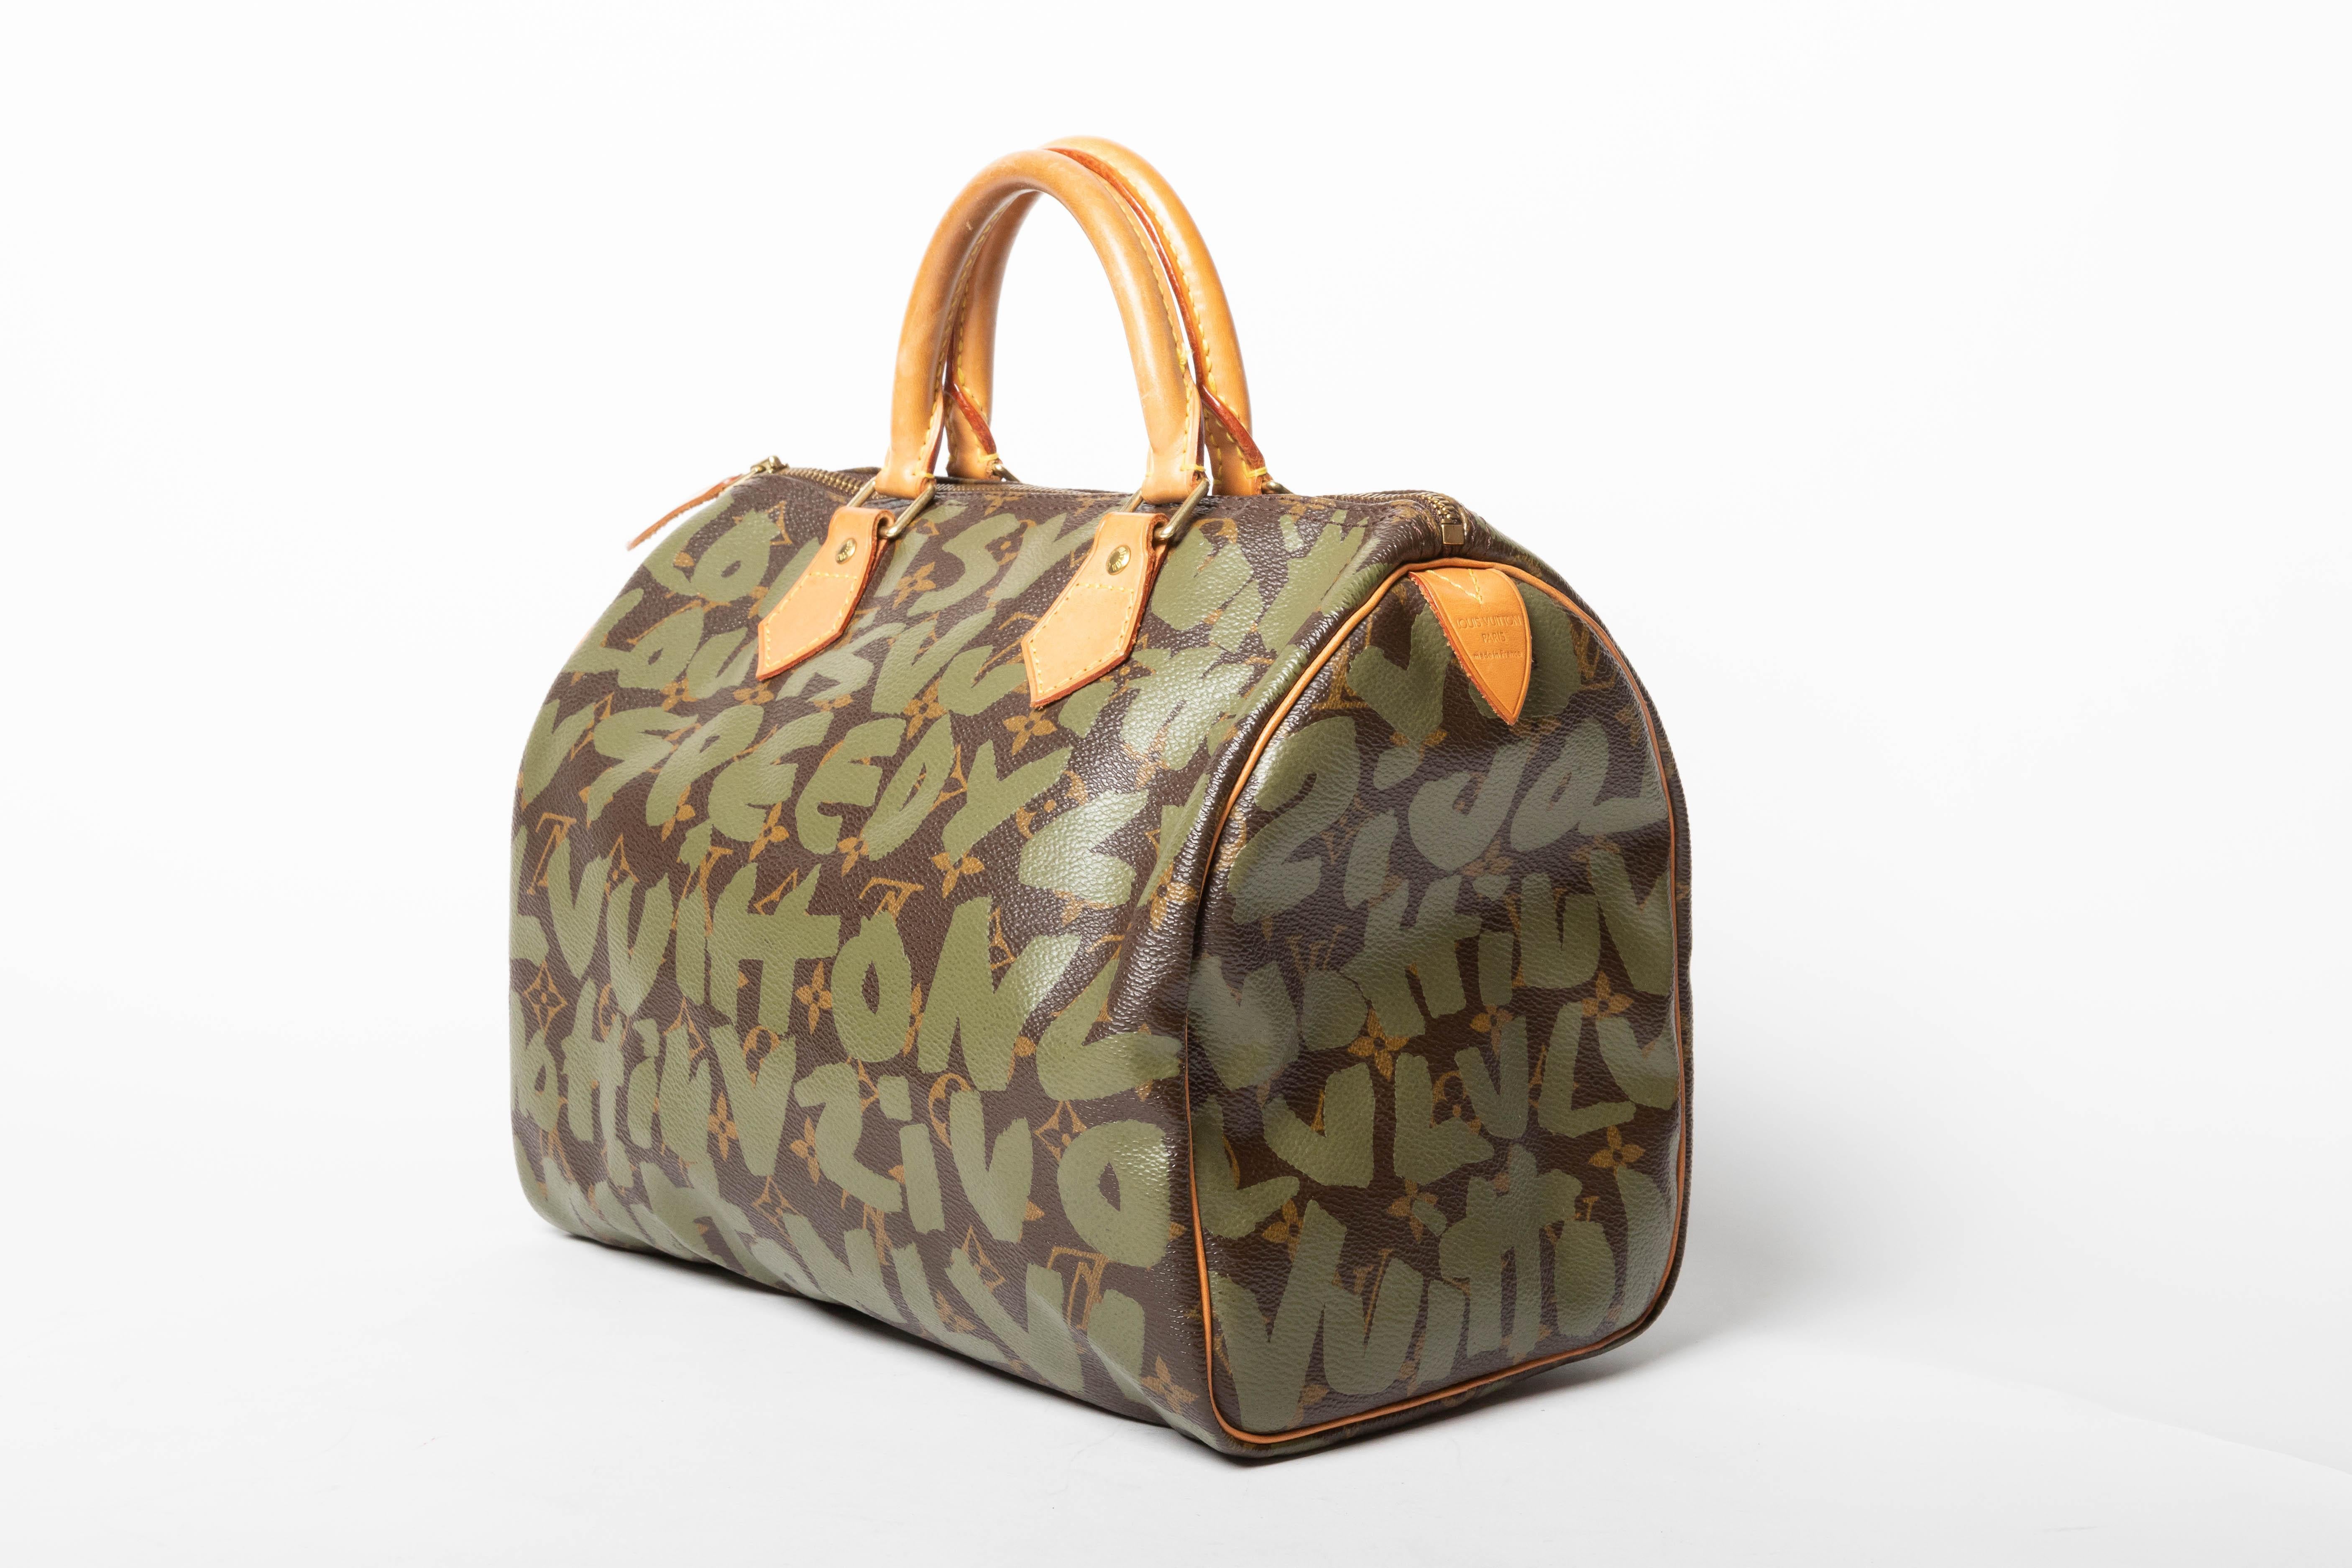 Louis Vuitton Stephen Sprouse Monogram Graffiti Speedy - 30 cm In Good Condition For Sale In Westhampton Beach, NY